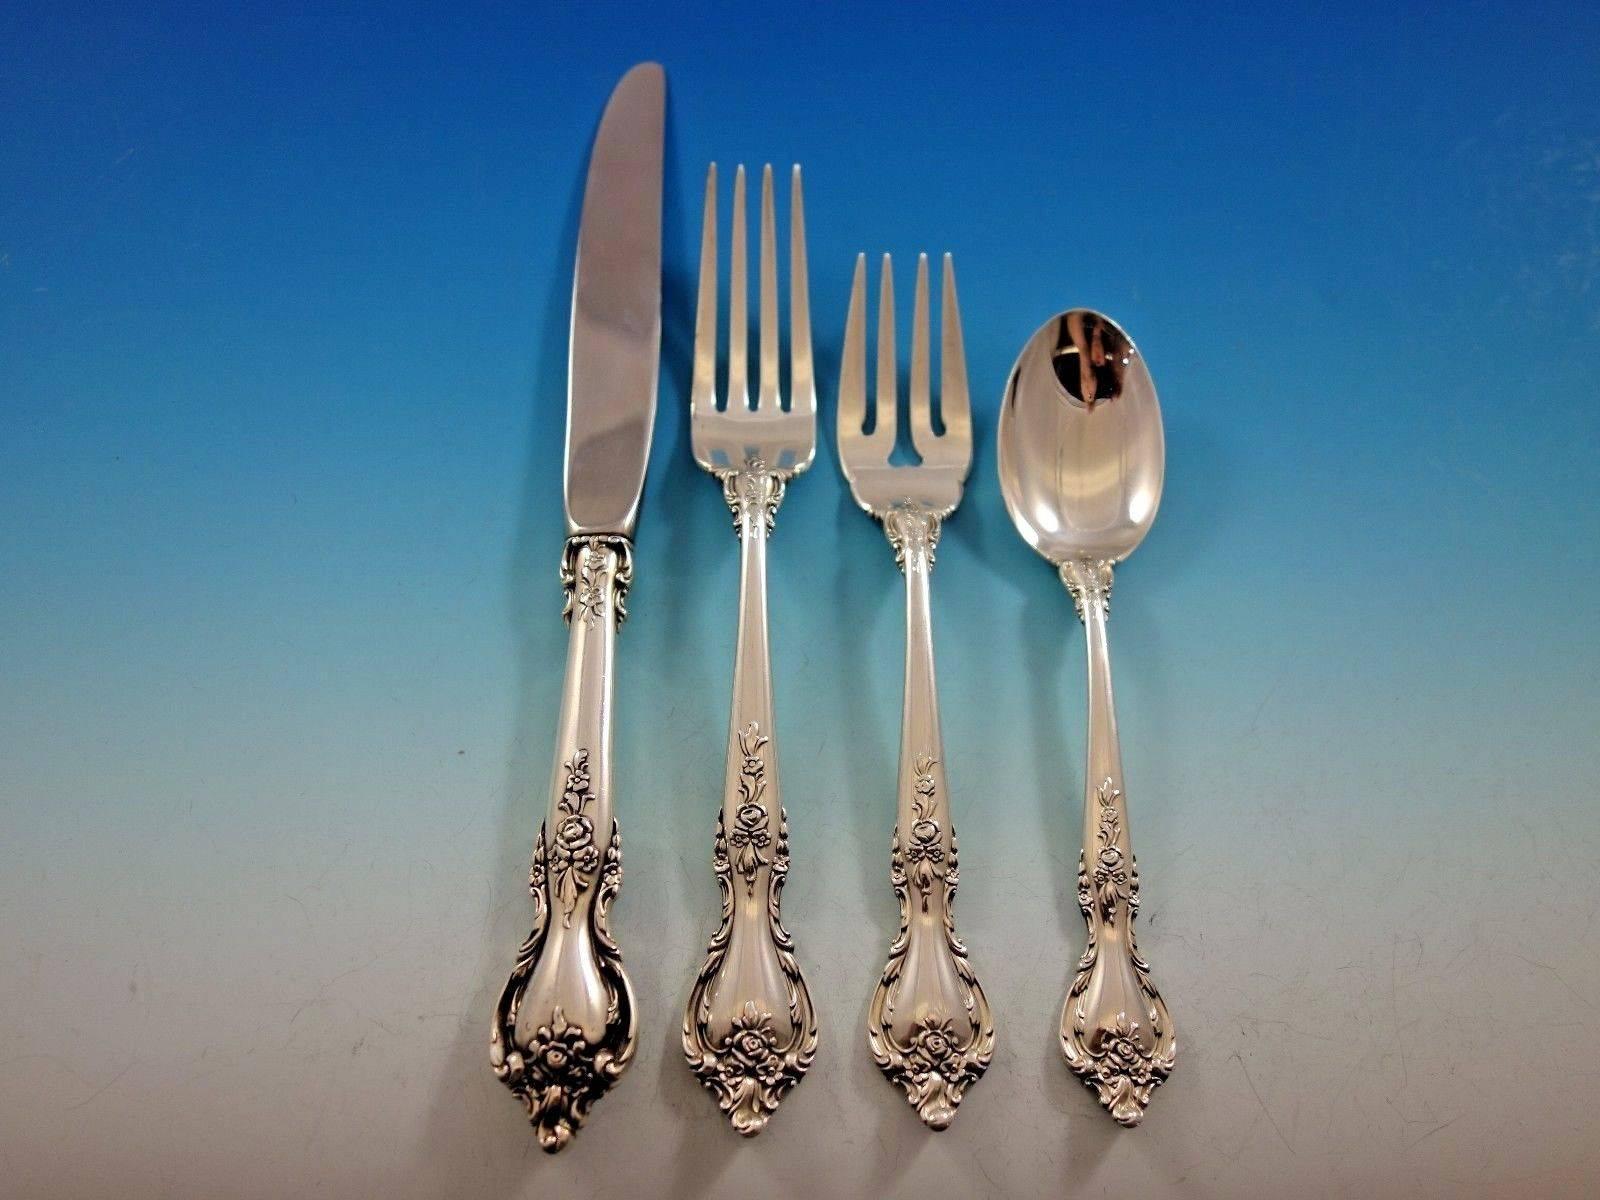 Delacourt by Lunt Sterling Silver Flatware Set for 12 Service 48 Pieces In Excellent Condition For Sale In Big Bend, WI